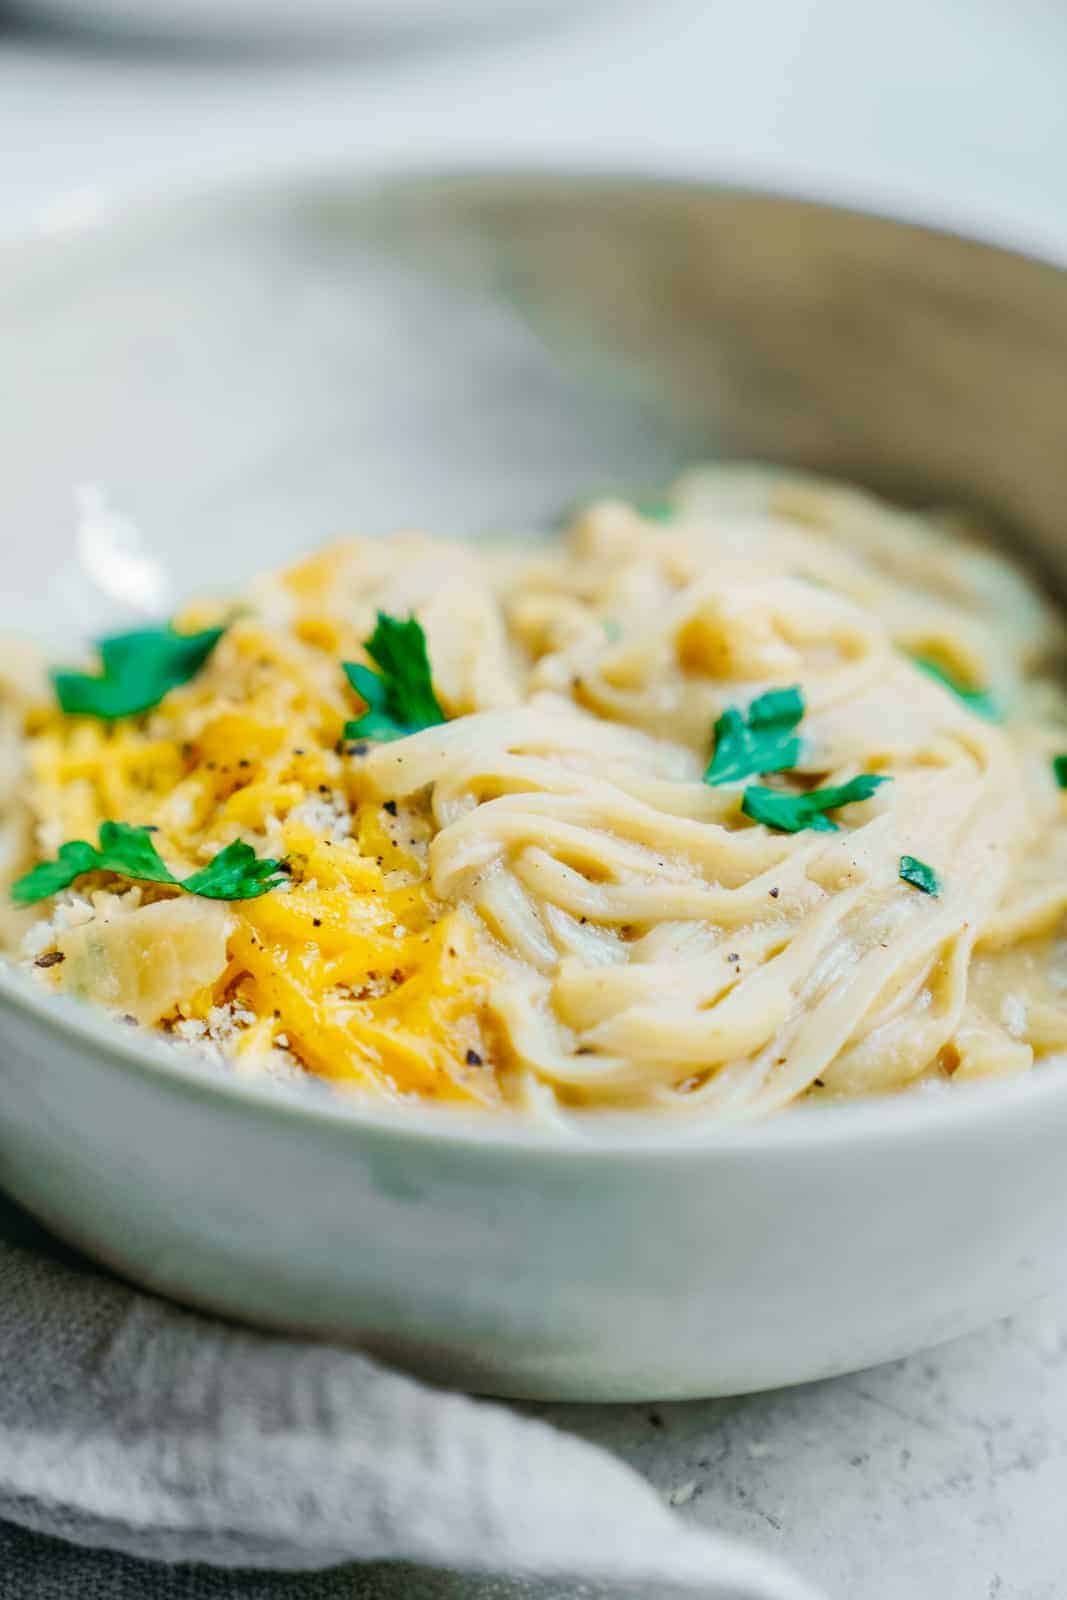 Cauliflower Cheese Sauce over a bowl of fettuccini noodles